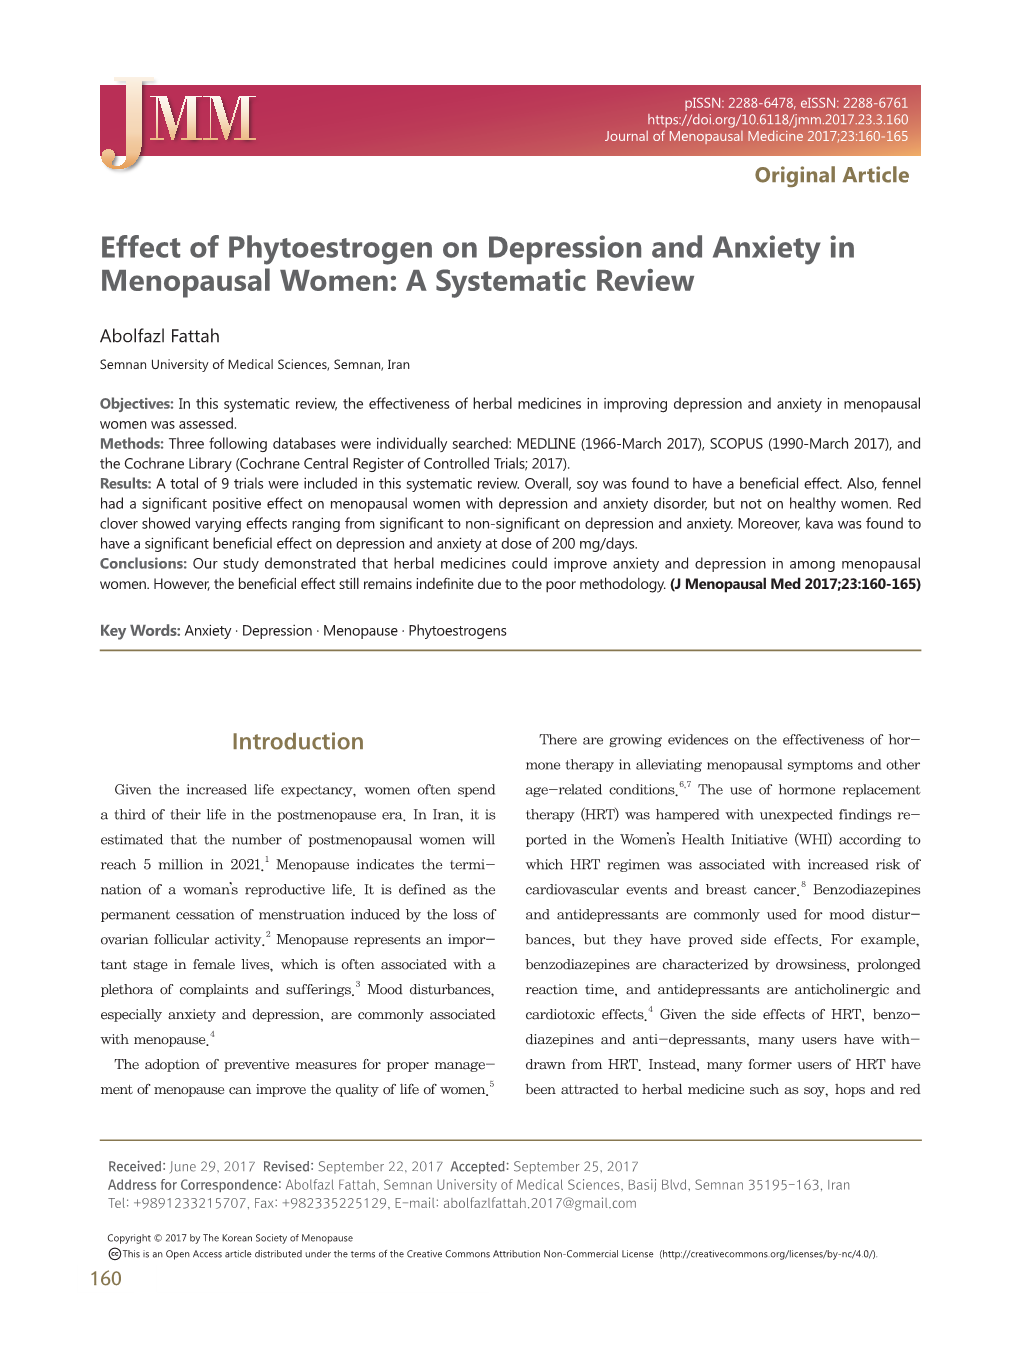 Effect of Phytoestrogen on Depression and Anxiety in Menopausal Women: a Systematic Review